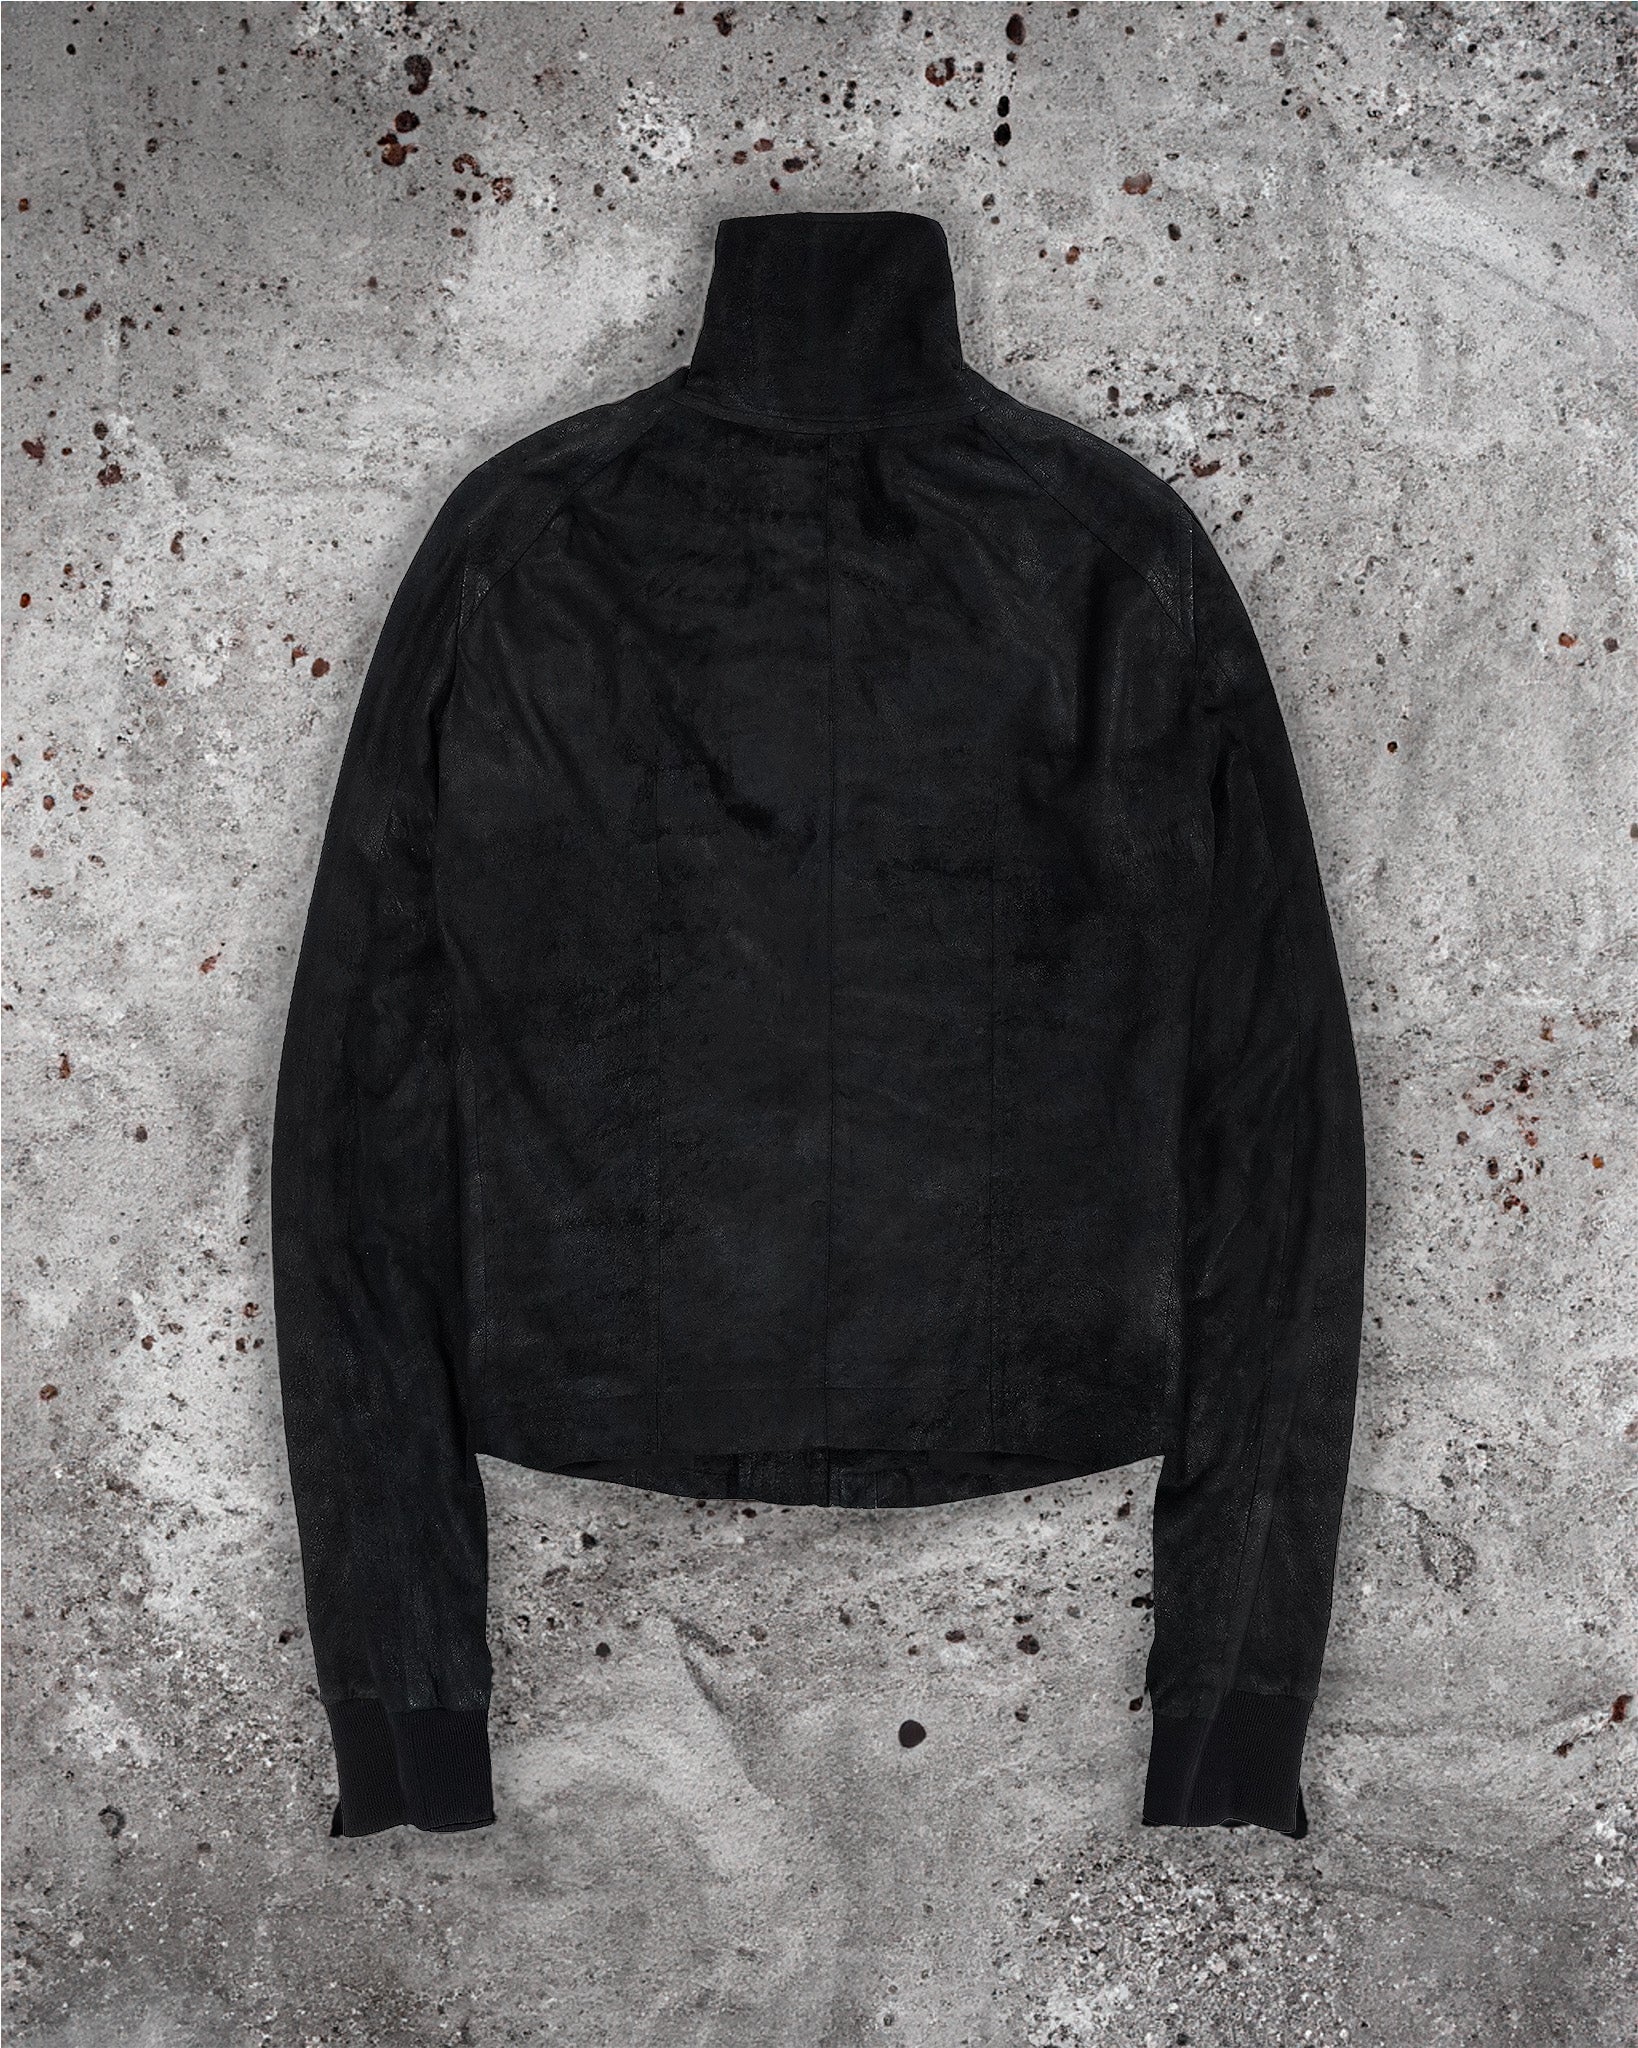 Rick Owens “Blistered” Leather Jacket - FW11 “Limo”